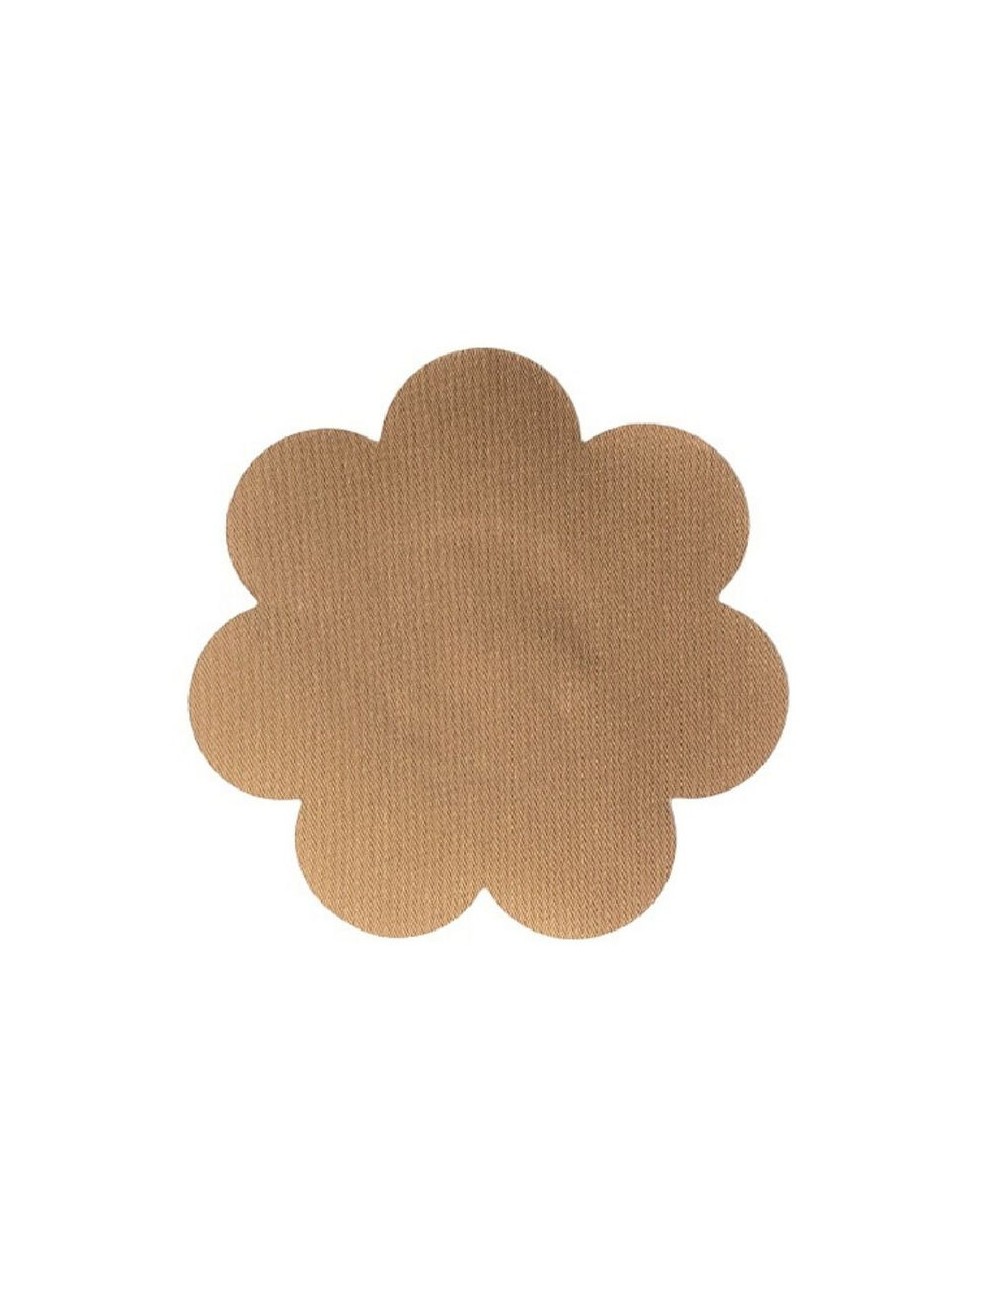 BYE BRA BREAST LIFT PADS + 3 PAIRS OF SATIN NIPPLE COVERS - BROWN SIZE D-F